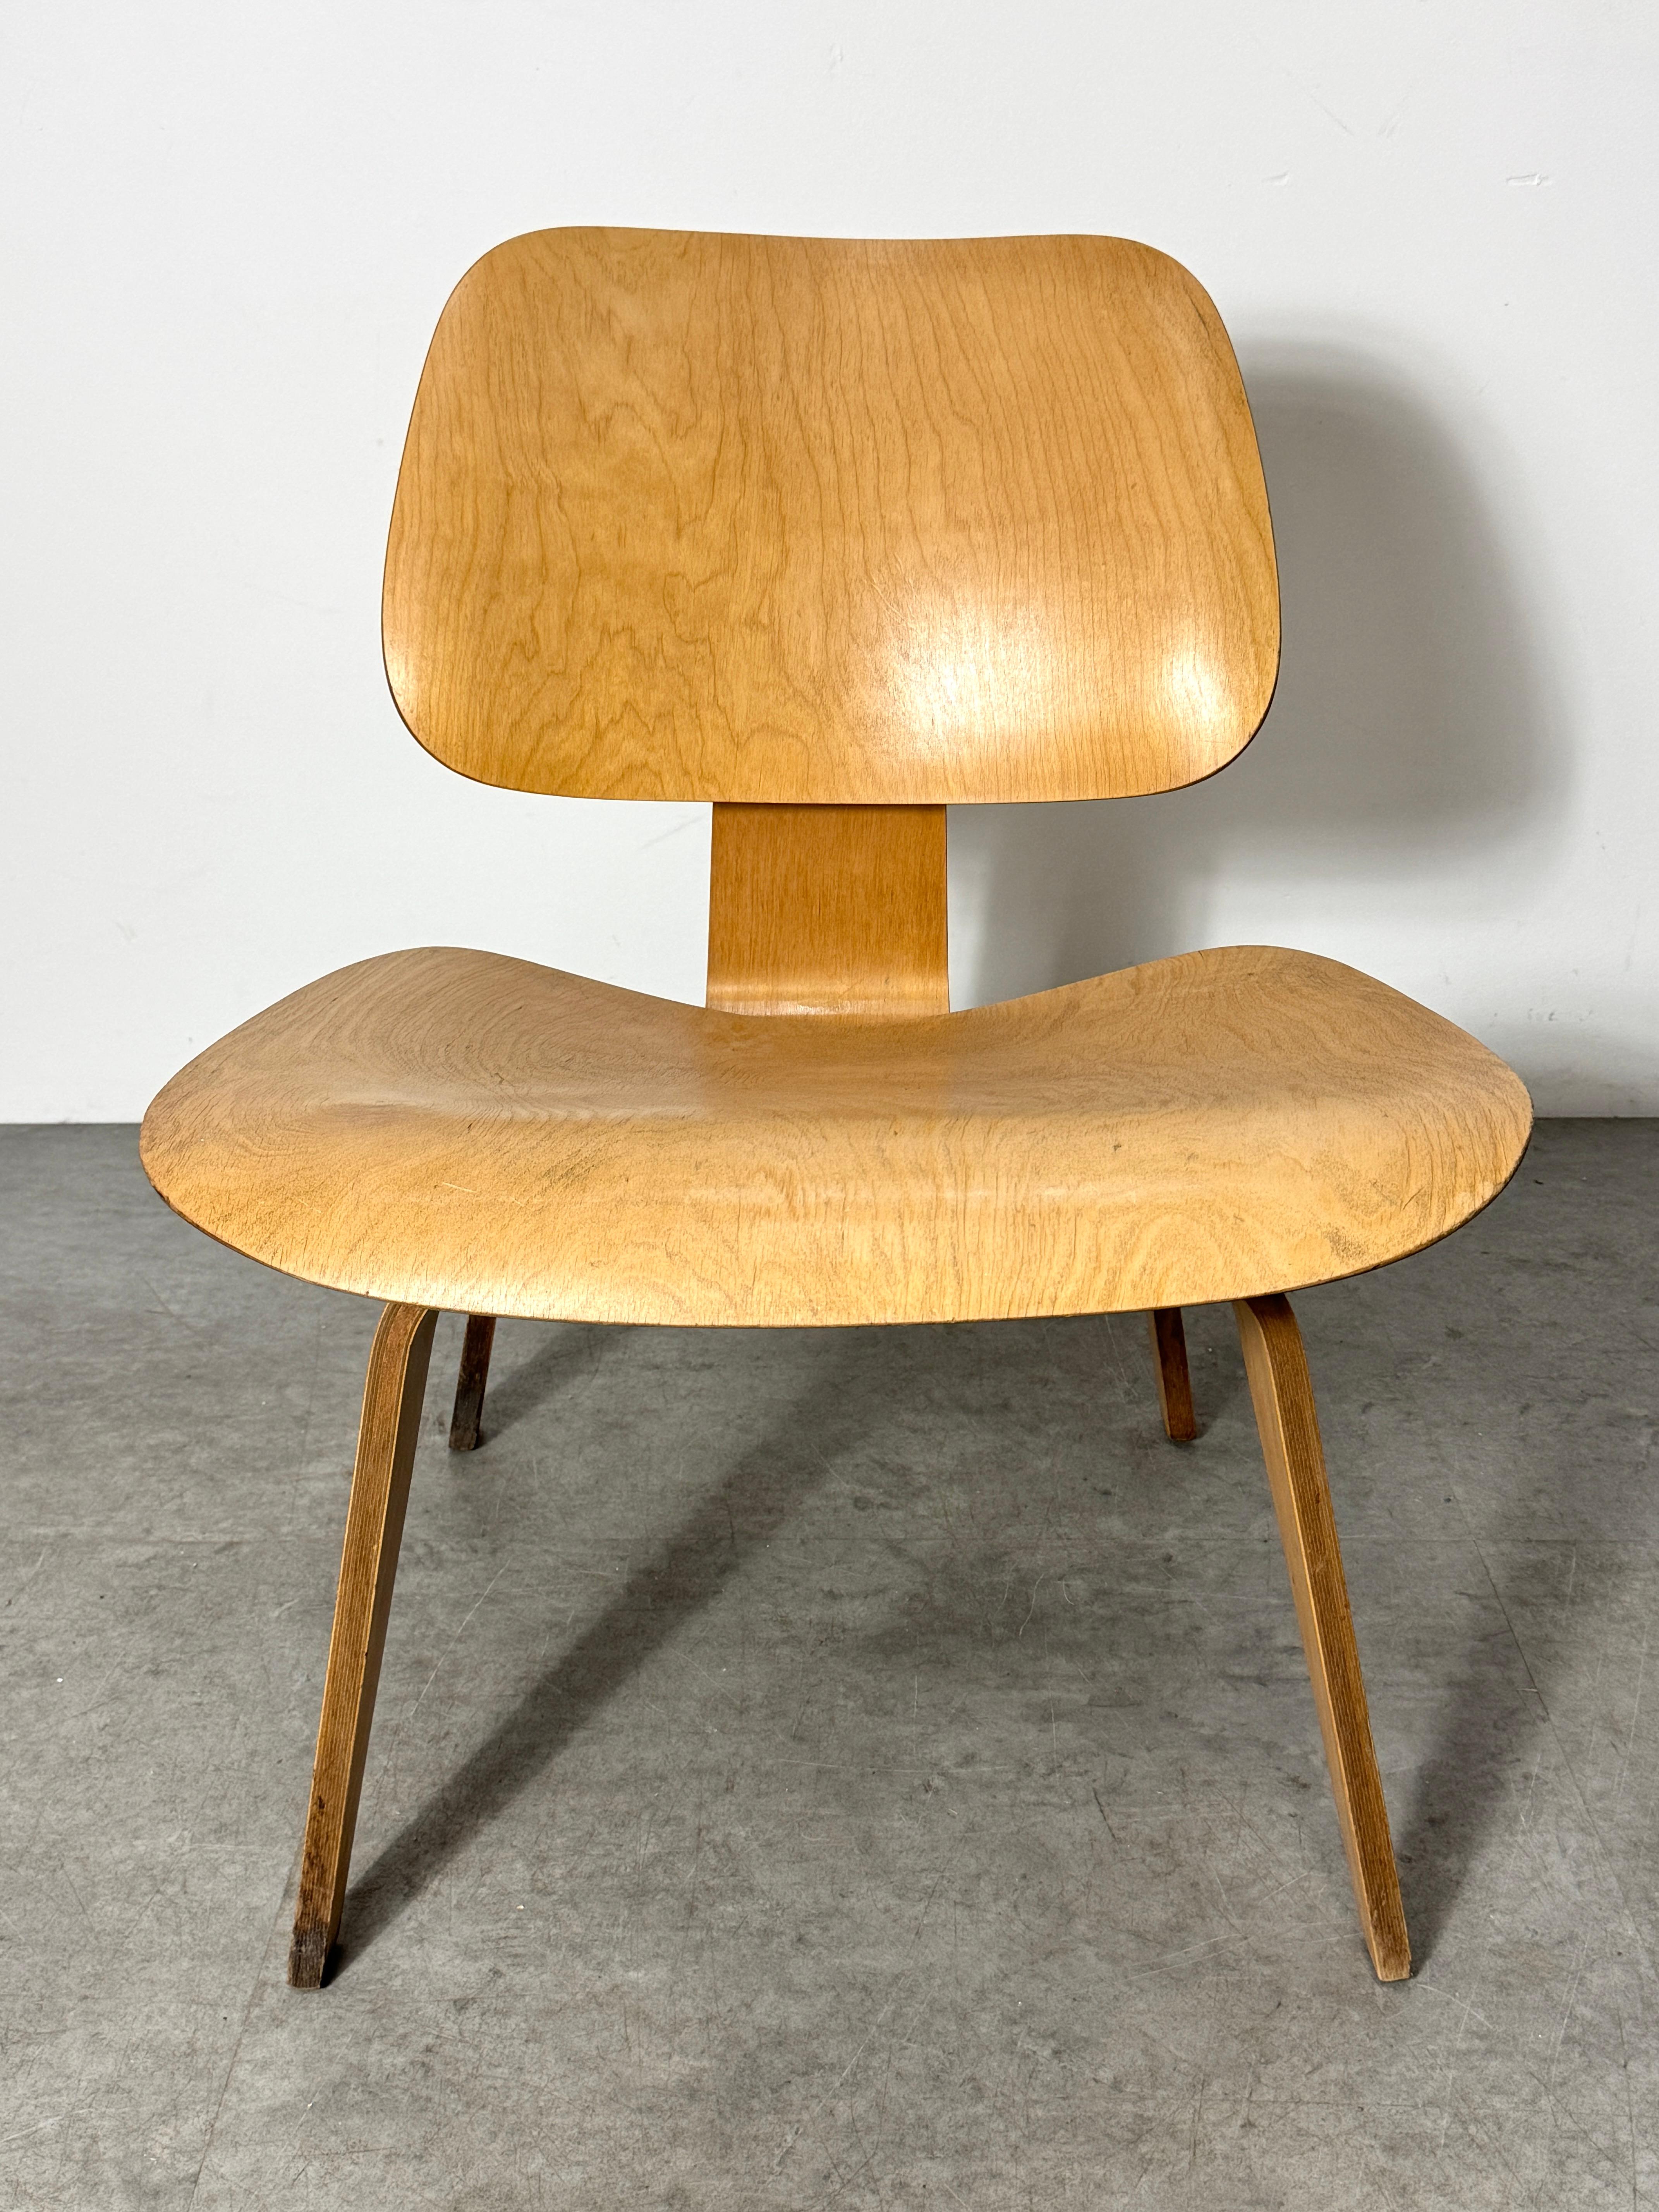 Early Vintage Charles Eames for Herman Miller LCW Birch Plywood Lounge Chair In Fair Condition For Sale In Troy, MI